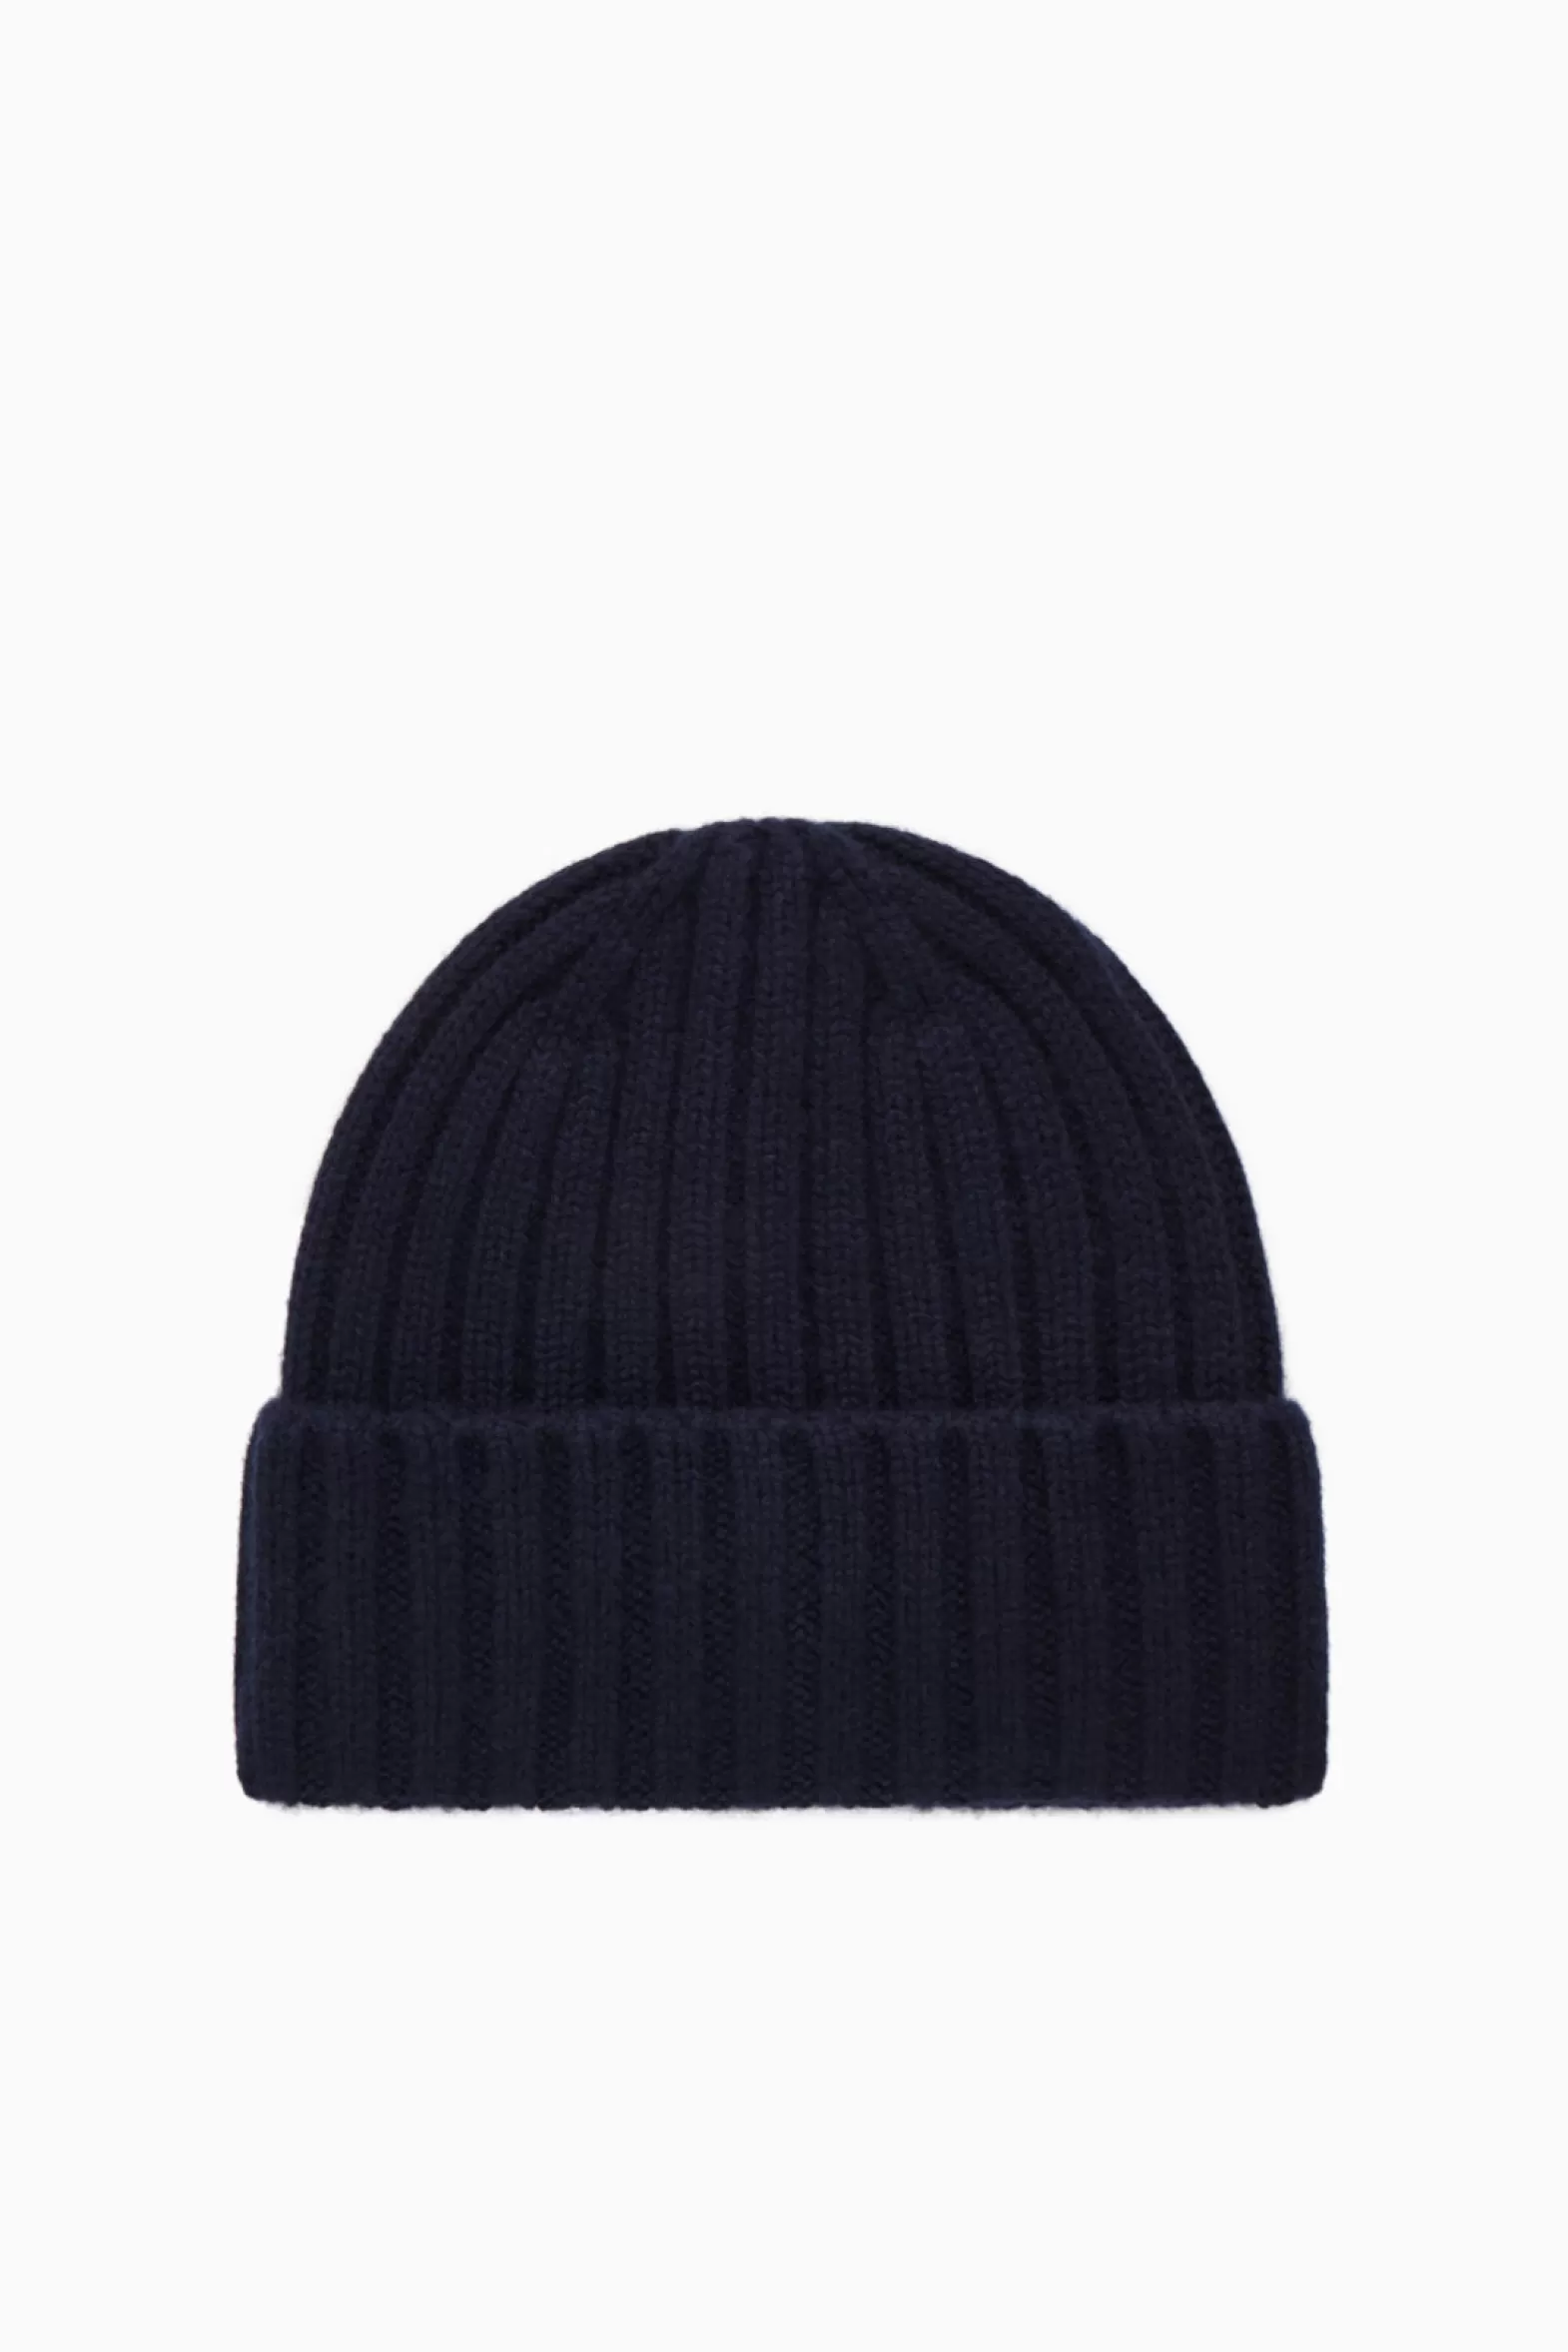 COS CHUNKY PURE CASHMERE BEANIE